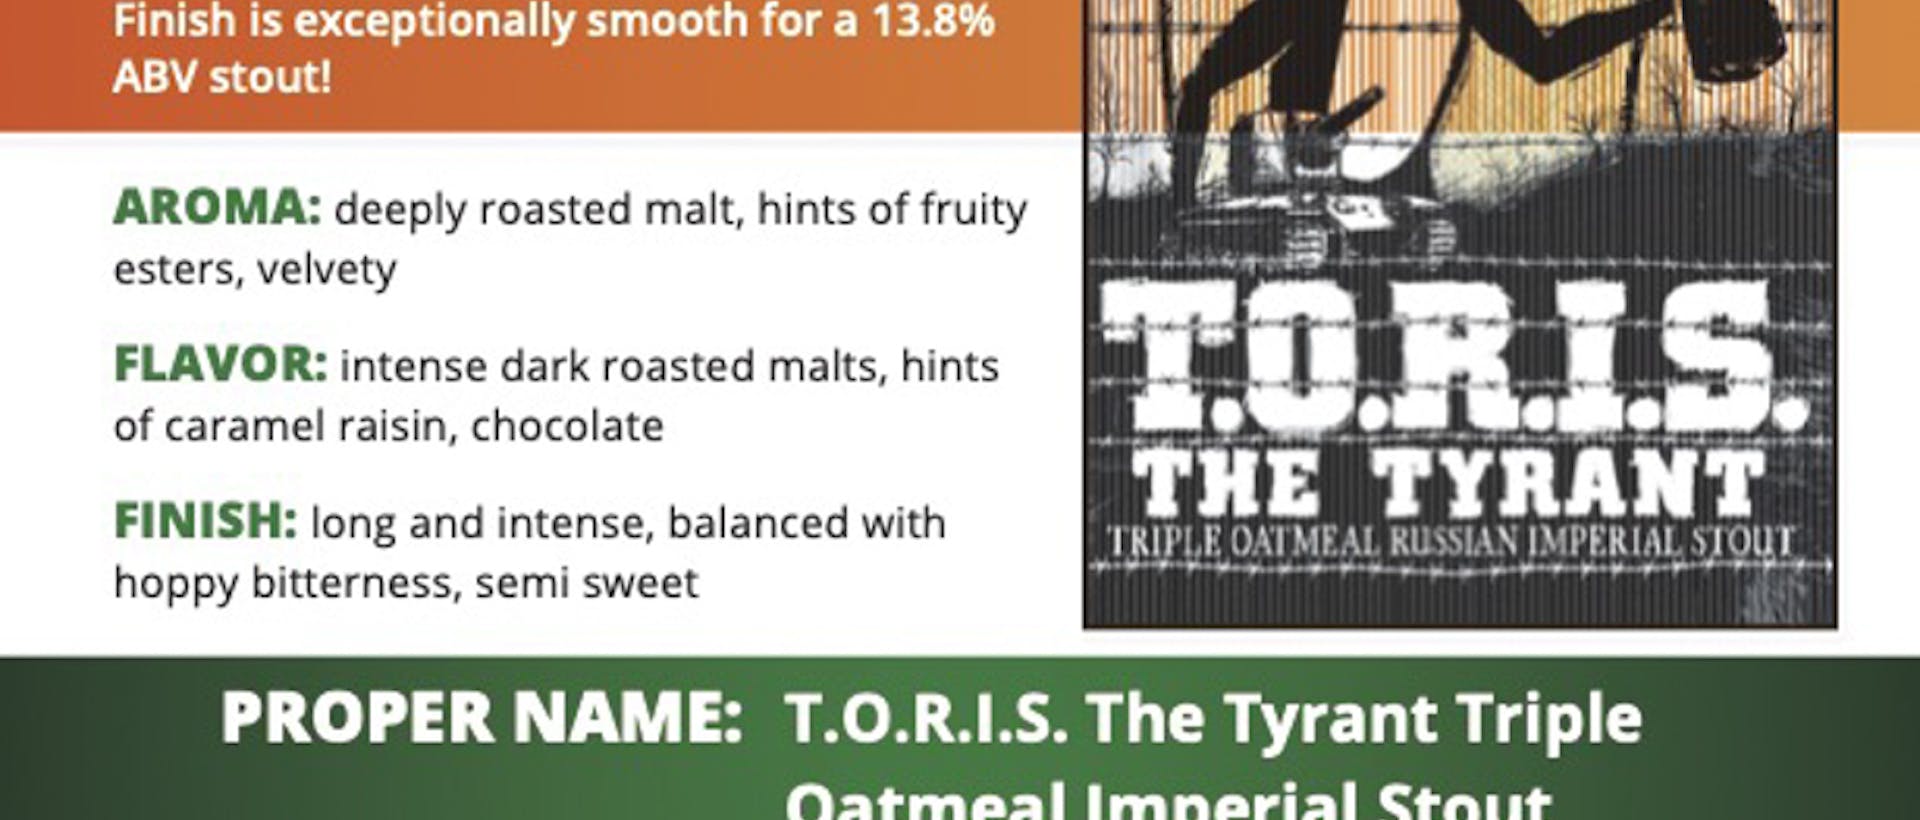 HF_Sell Sheet - Limited - T.O.R.I.S. The Tyrant Triple Oatmeal Imperial Stout (updated 06-10-2022)